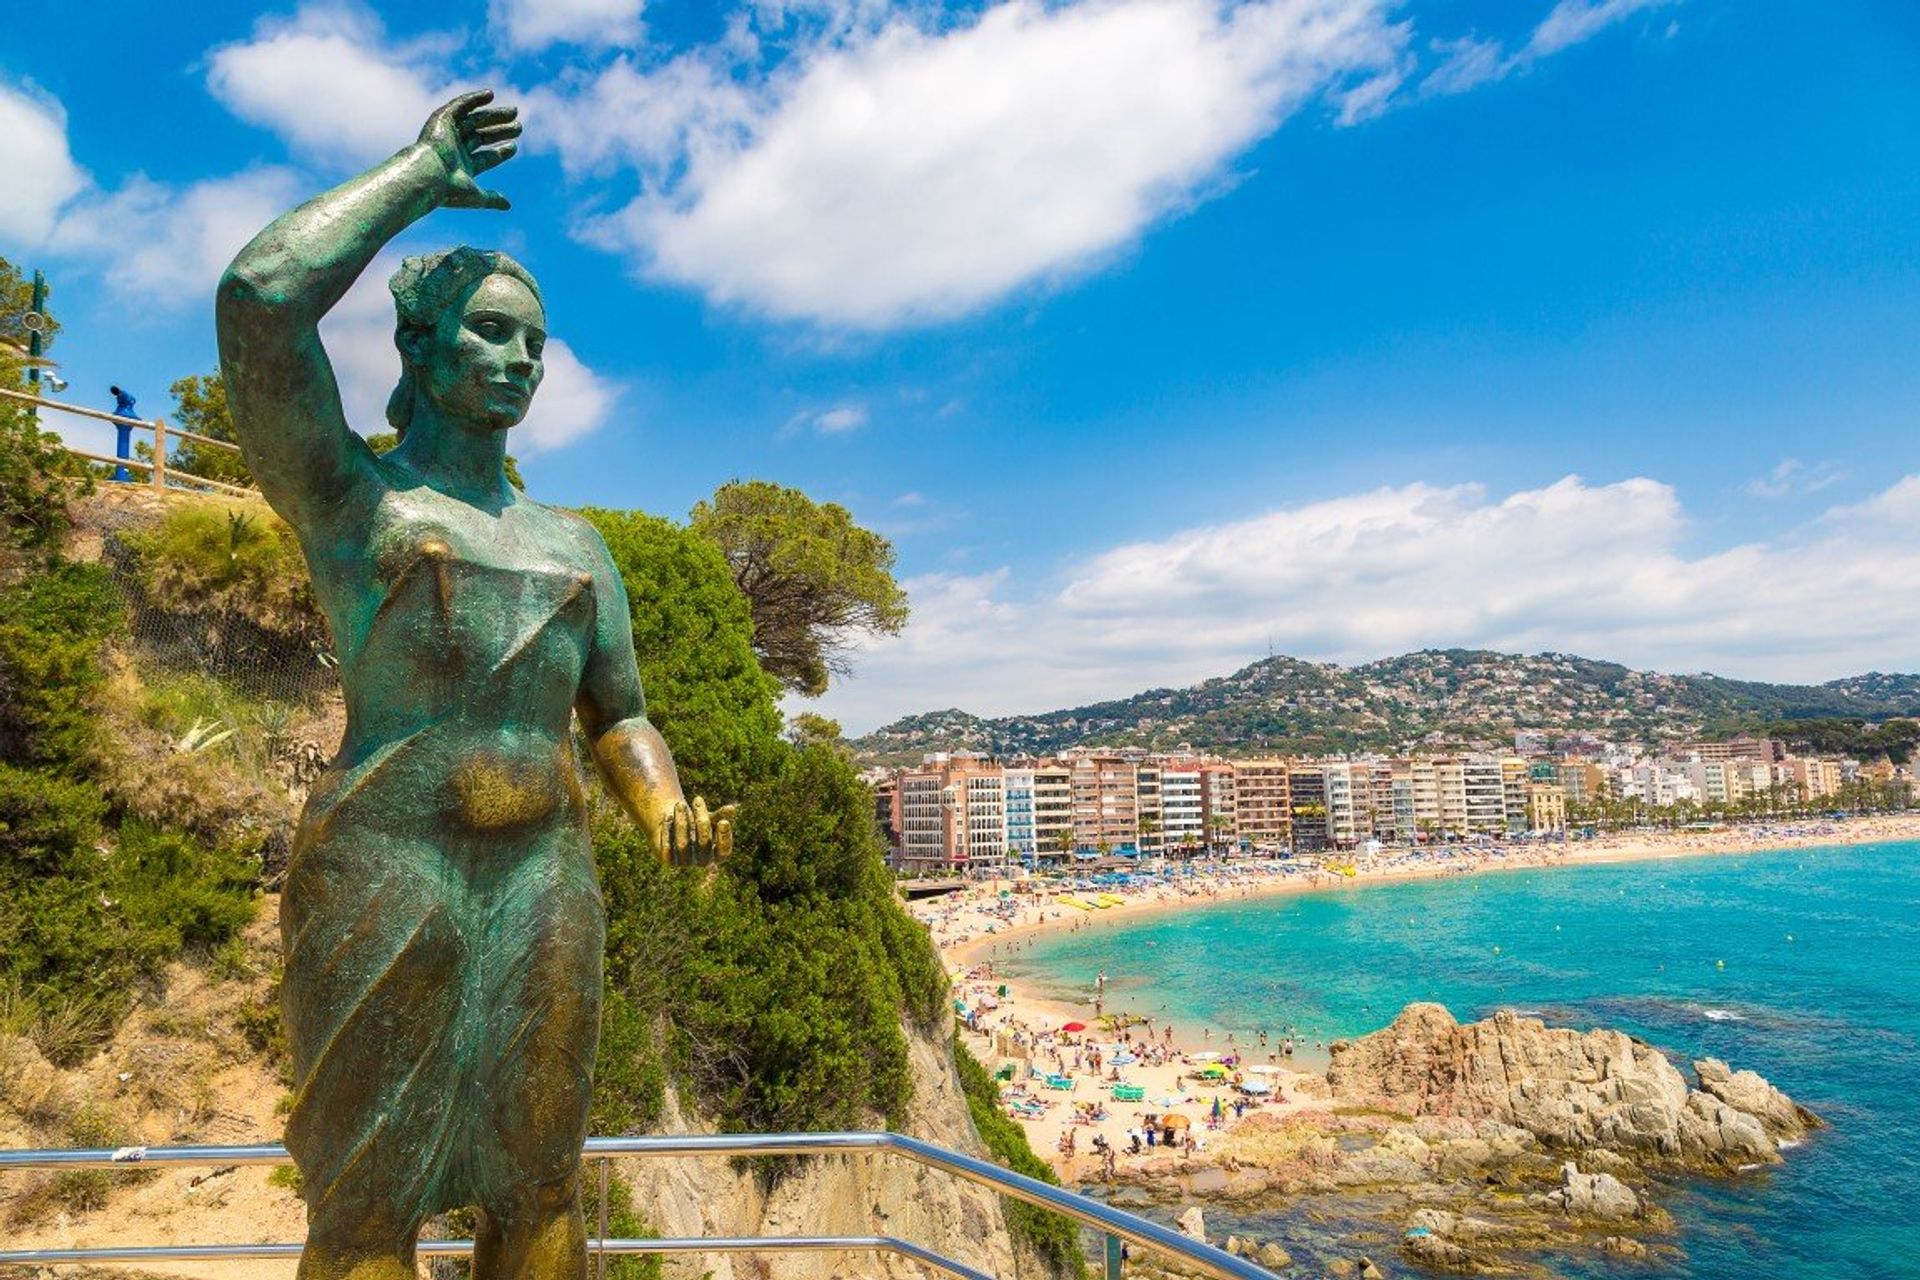 The Dona Marinera (Fisherman's Wife) statue has become an icon overlooking Lloret Beach